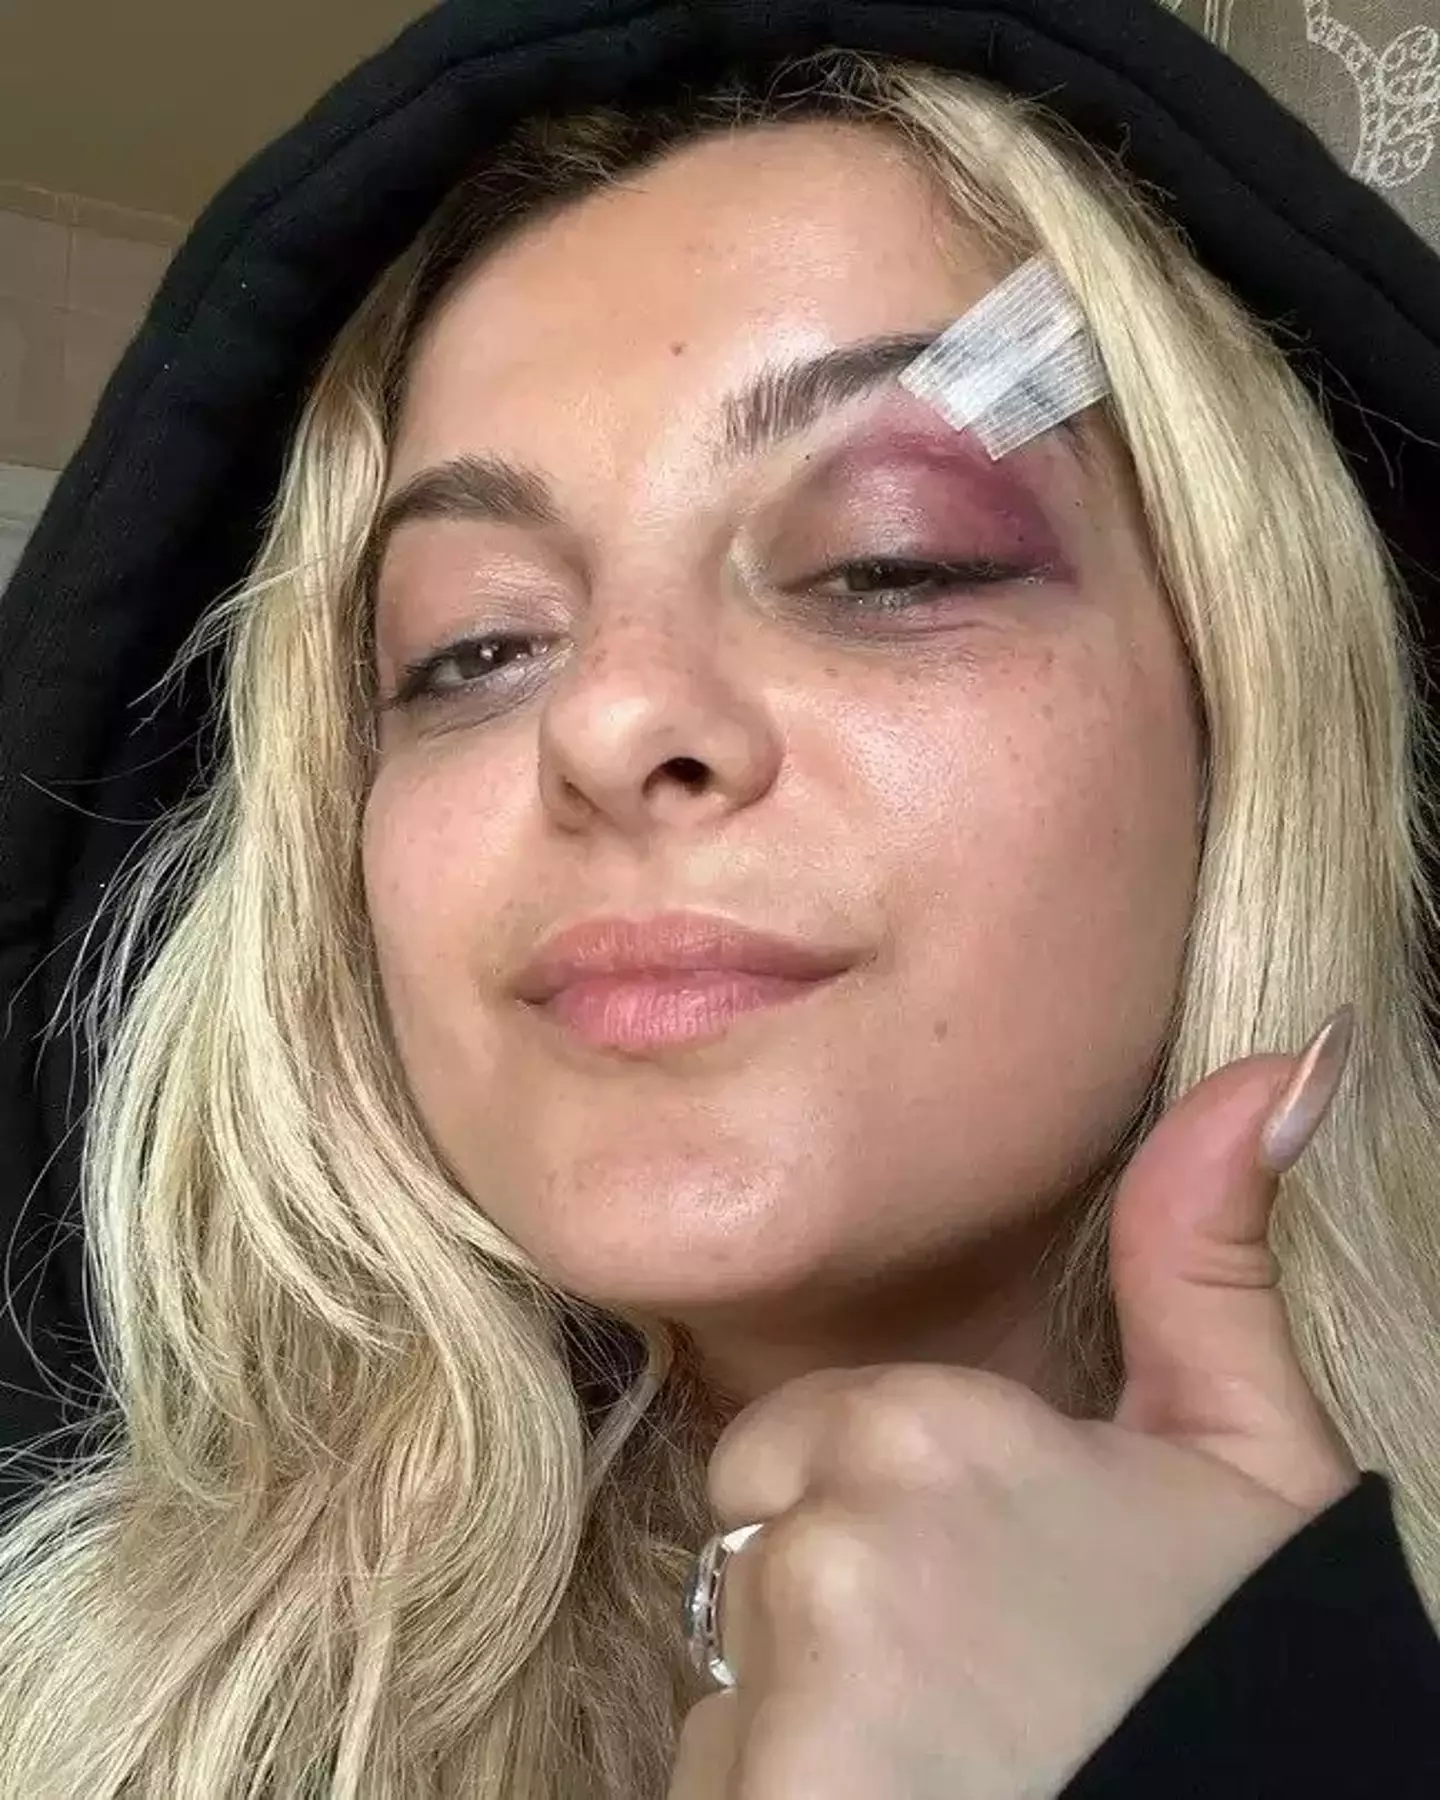 Bebe Rexha was left injured from the attack.